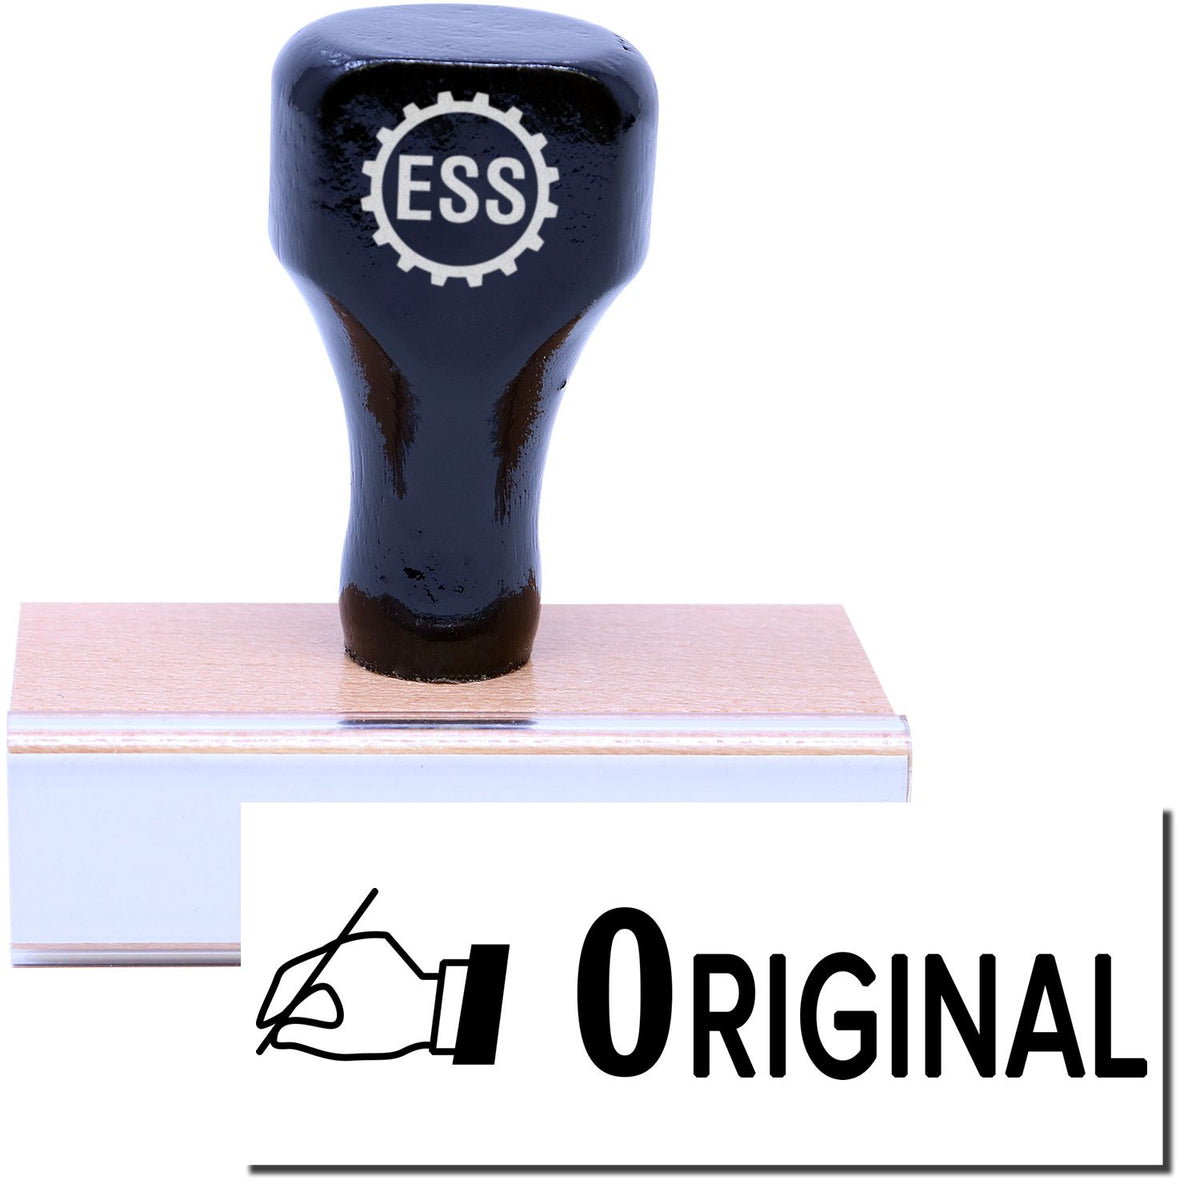 A stock office rubber stamp with a stamped image showing how the text &quot;0RIGINAL&quot; in a large bold font with a small icon of a hand holding a pen on the left side is displayed after stamping.